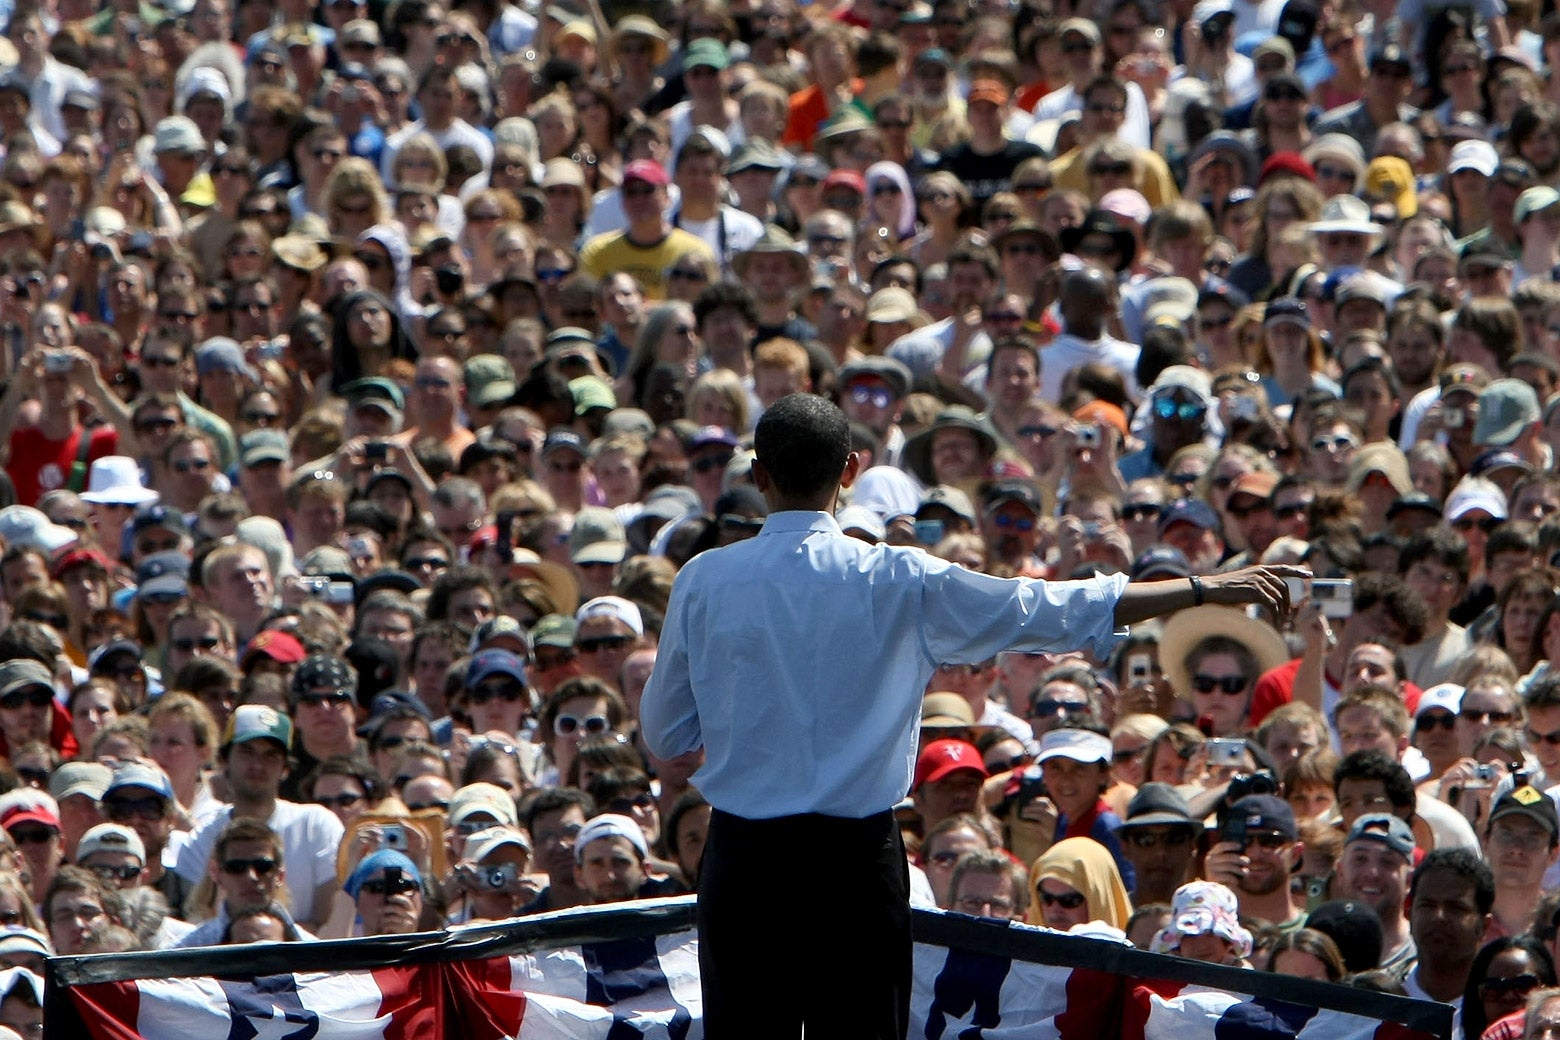 Barack Obama, seen from behind, gestures as he speaks to a large crowd outdoors.